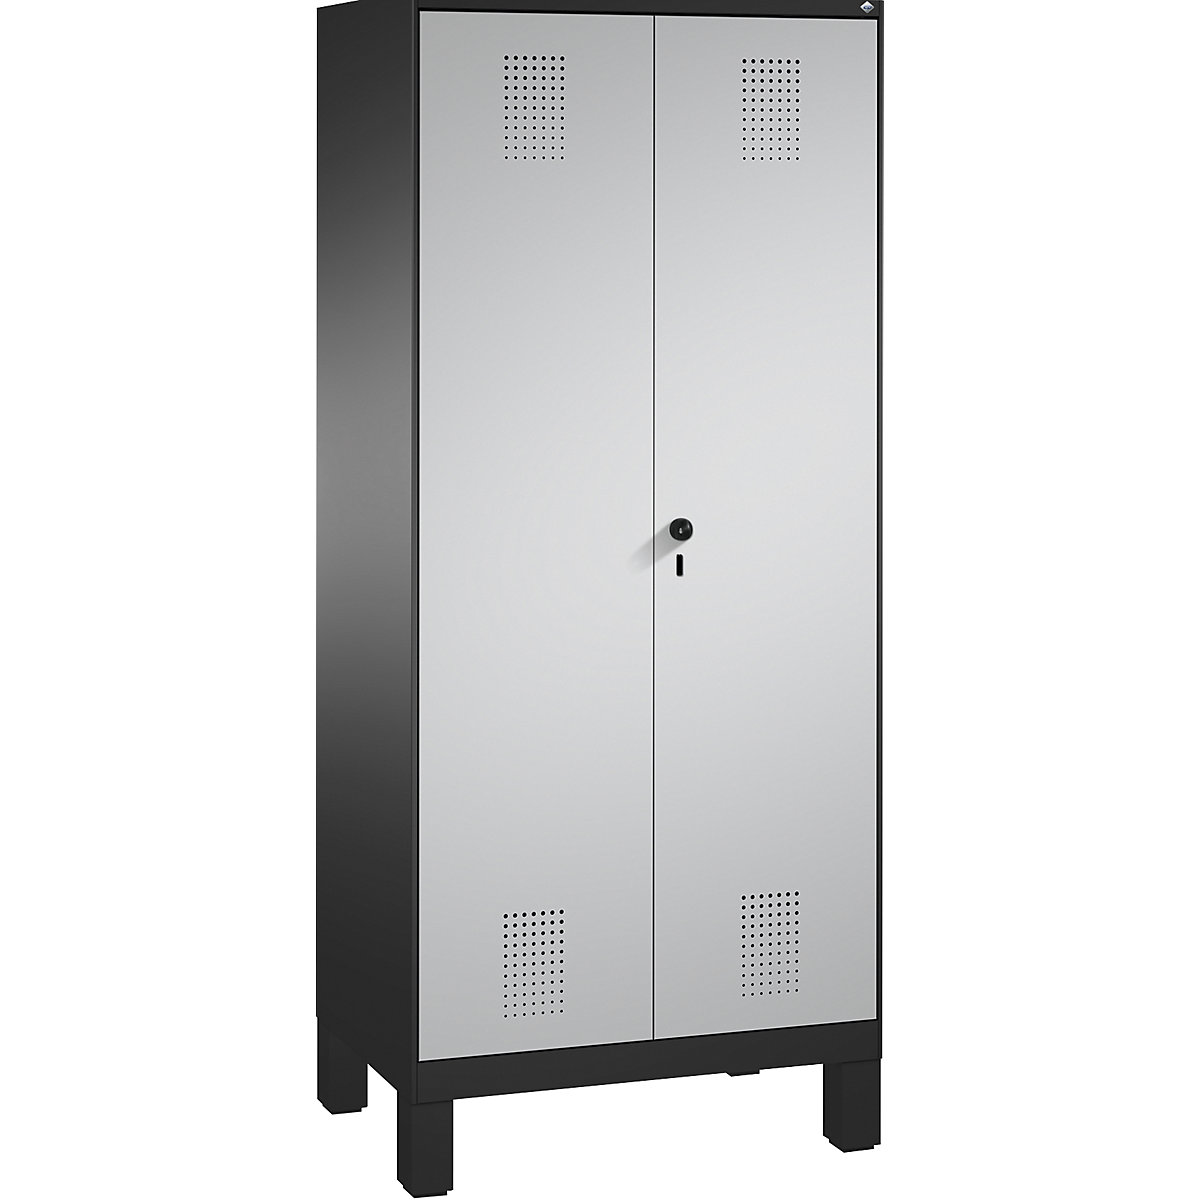 EVOLO cloakroom locker, doors close in the middle – C+P, 2 compartments, compartment width 400 mm, with feet, black grey / white aluminium-11